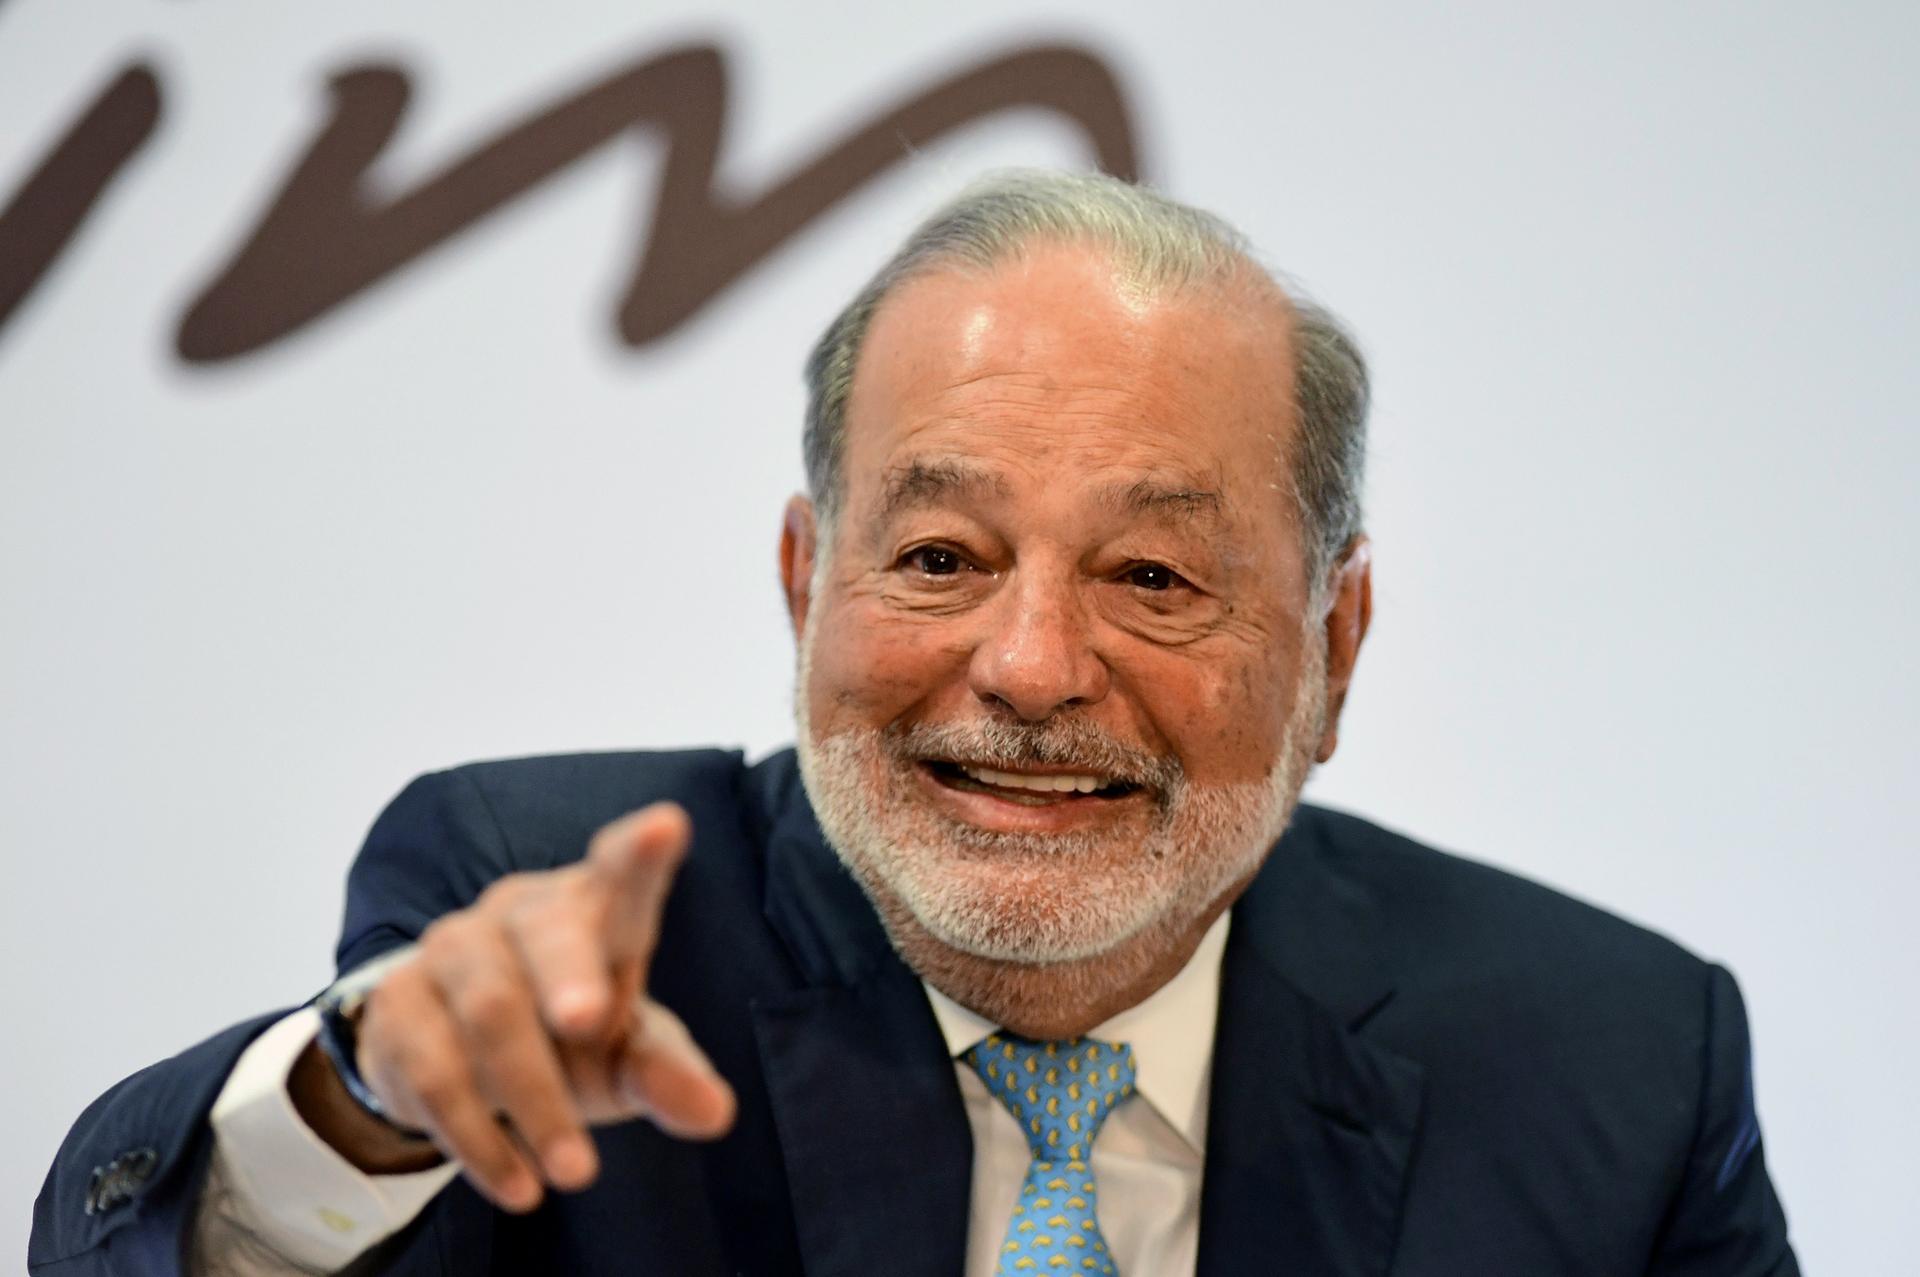 Billionaire Carlos Slim cashes in on 'failing' New York Times